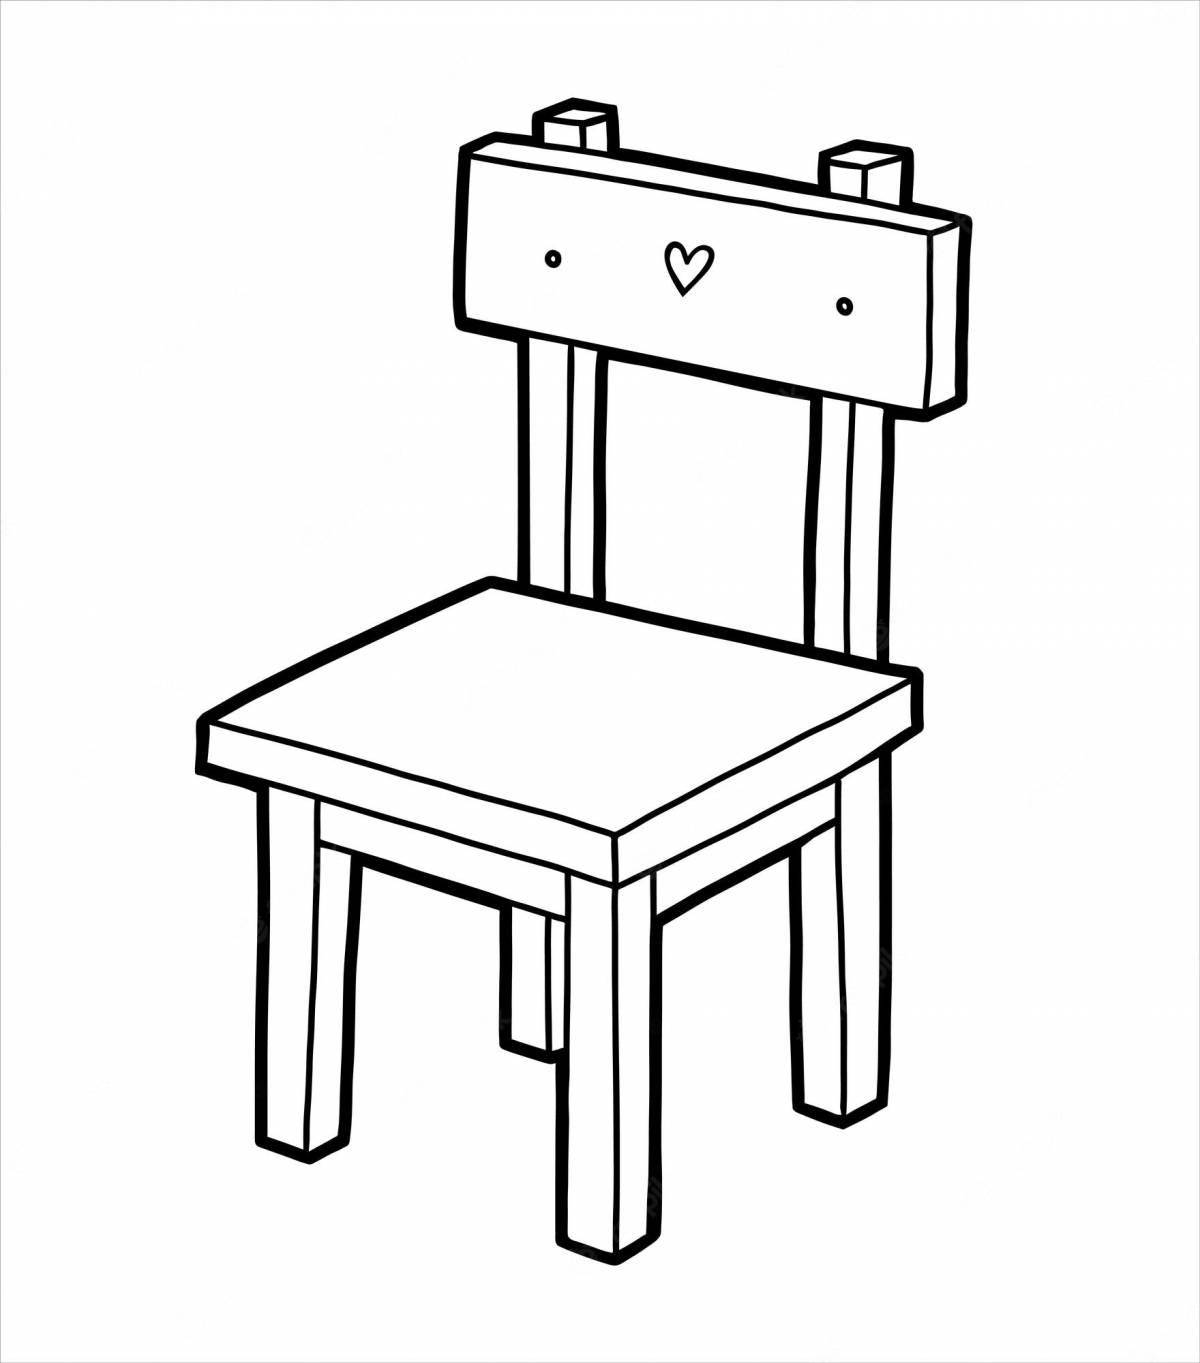 Coloring page graceful stool